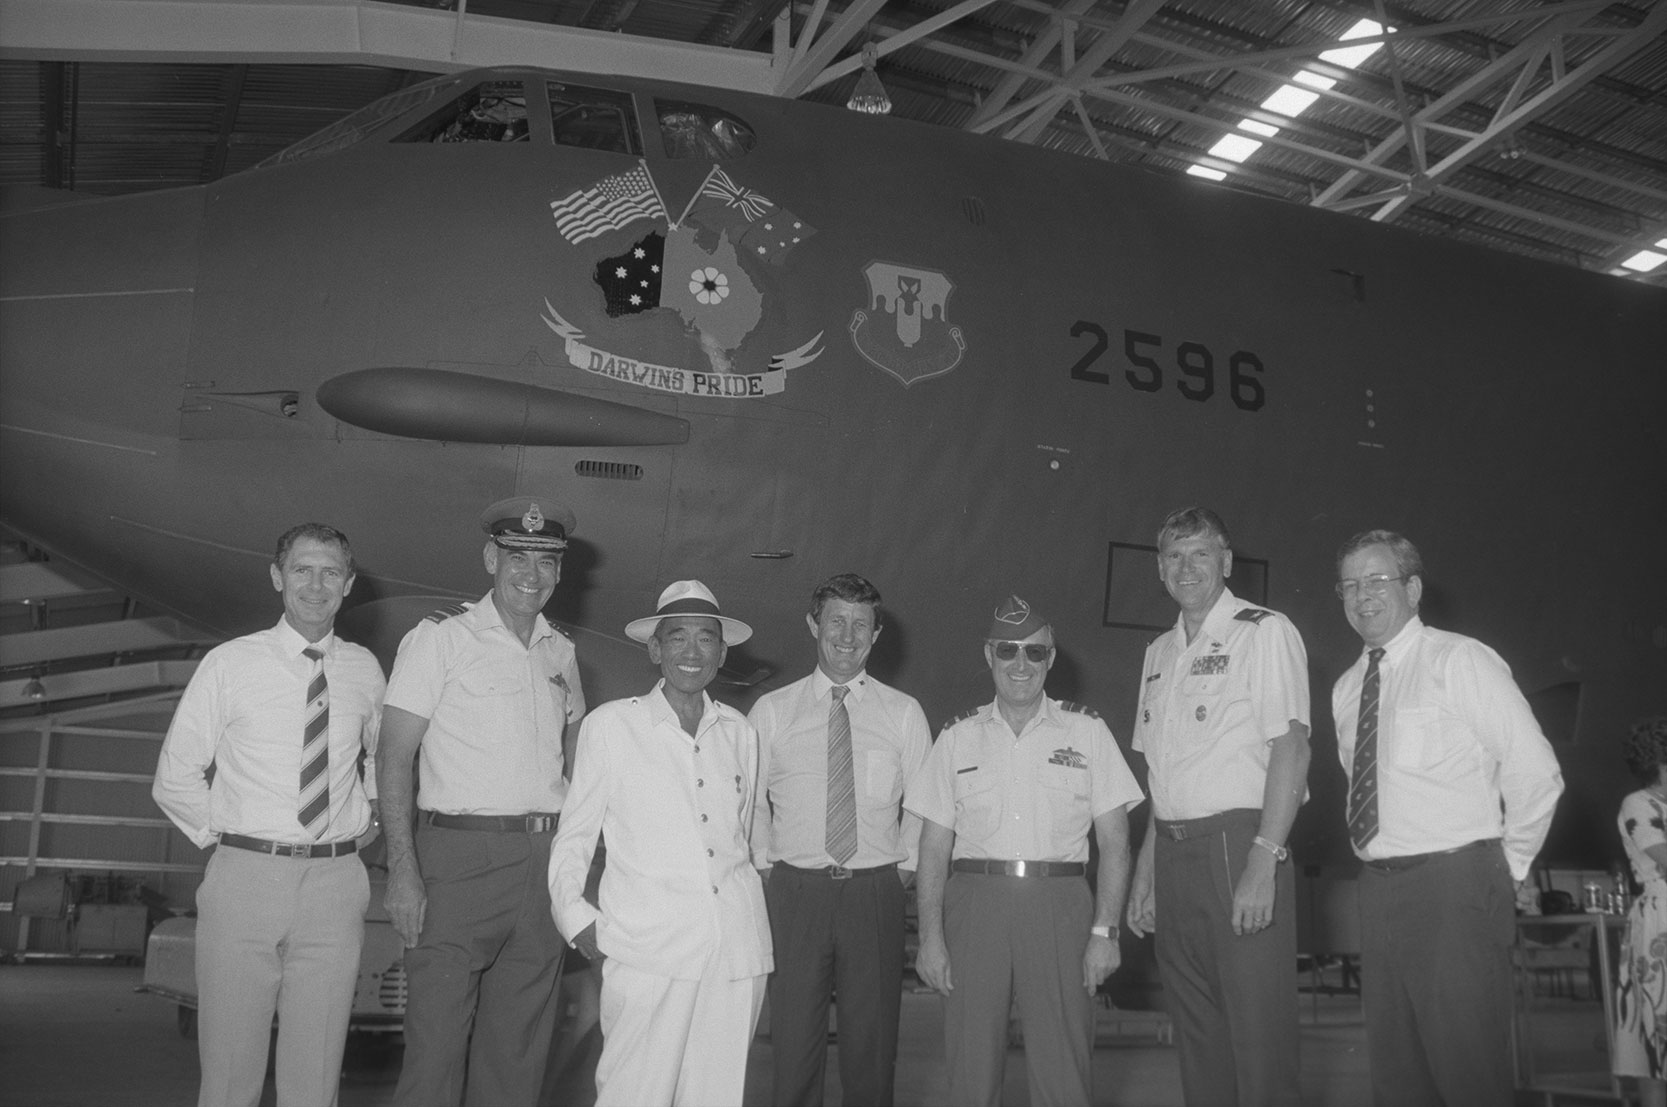 Opening of the Darwin Aviation Museum, 2 June 1990<br />Image courtesy of Library & Archives NT,  Department of the Chief Minister, NTRS 3823 P1, Box 11, BW2909, Image 27